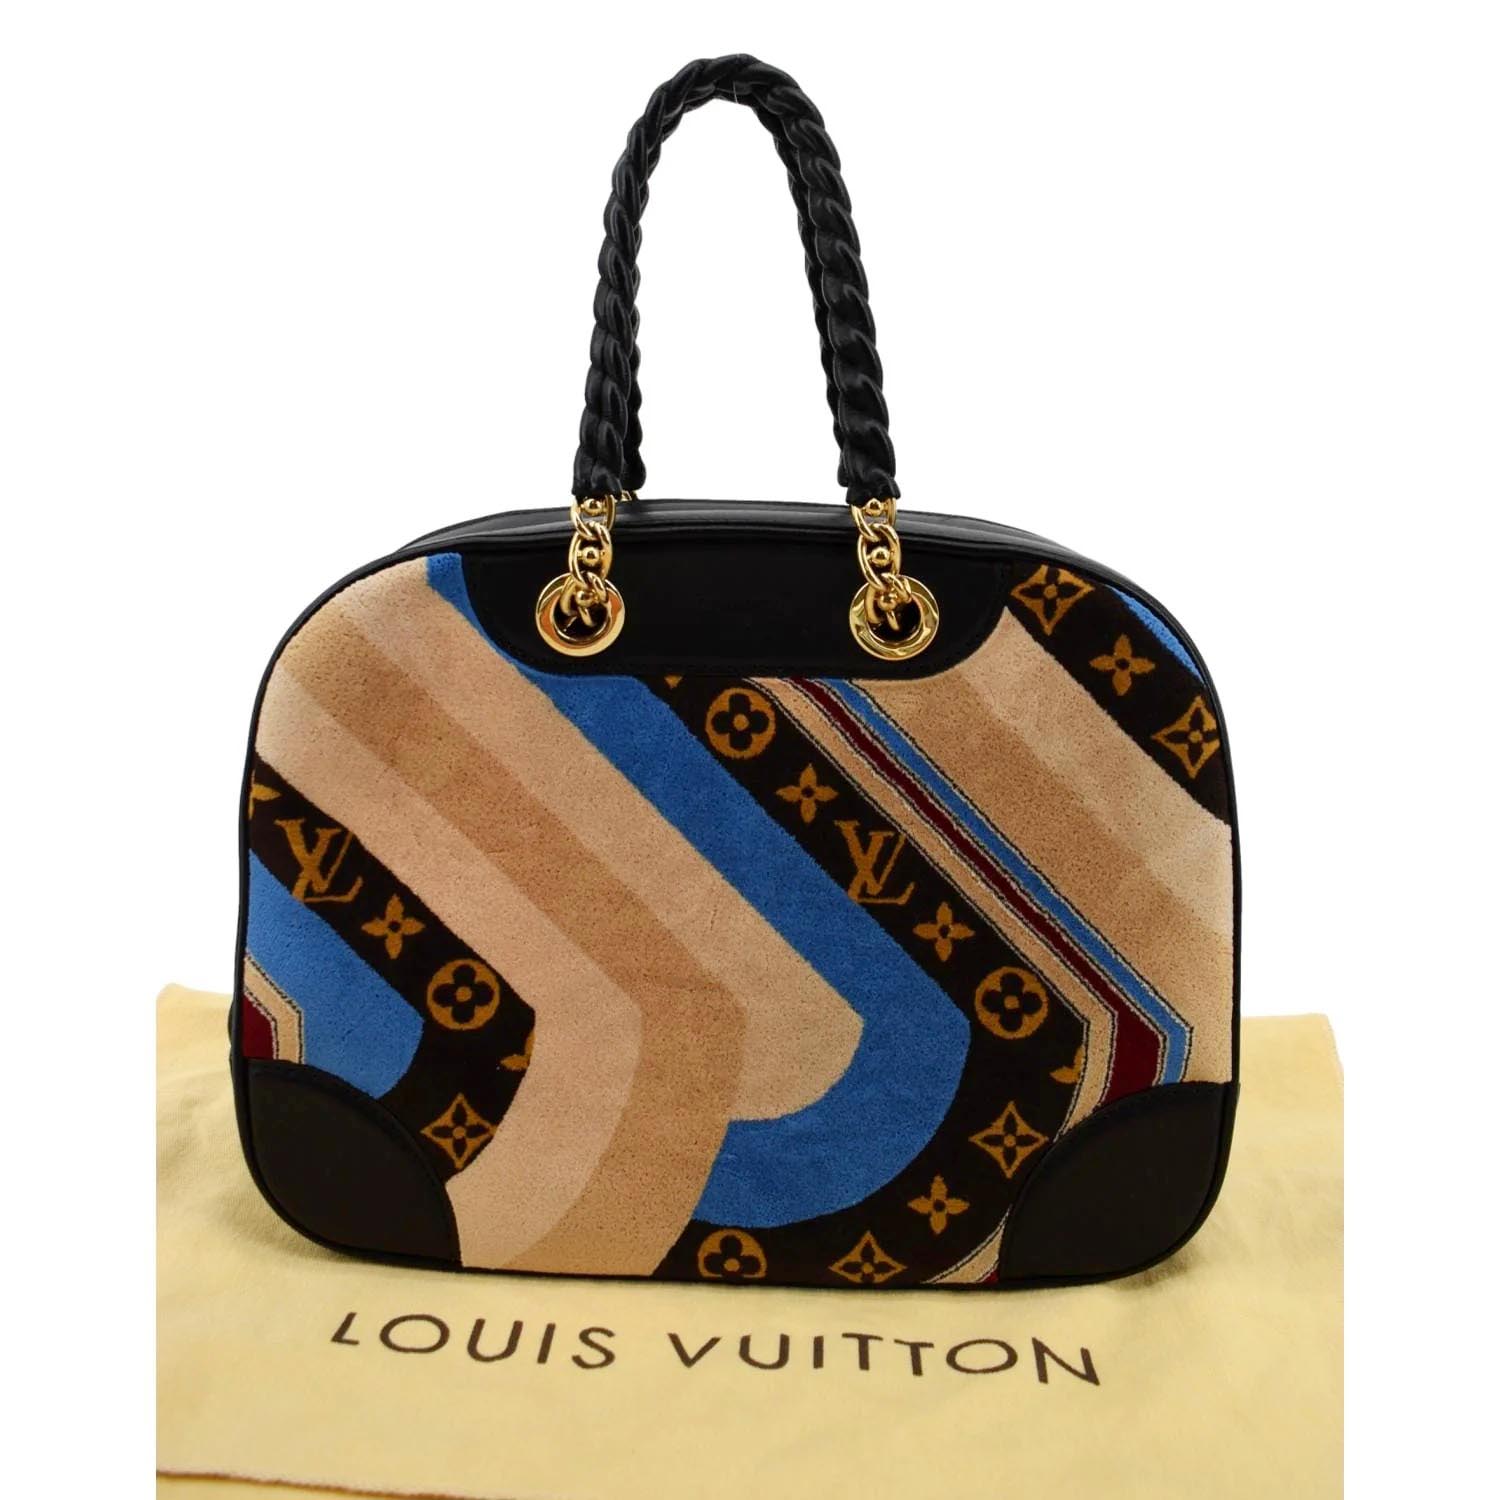 Products By Louis Vuitton: Bowling Vanity